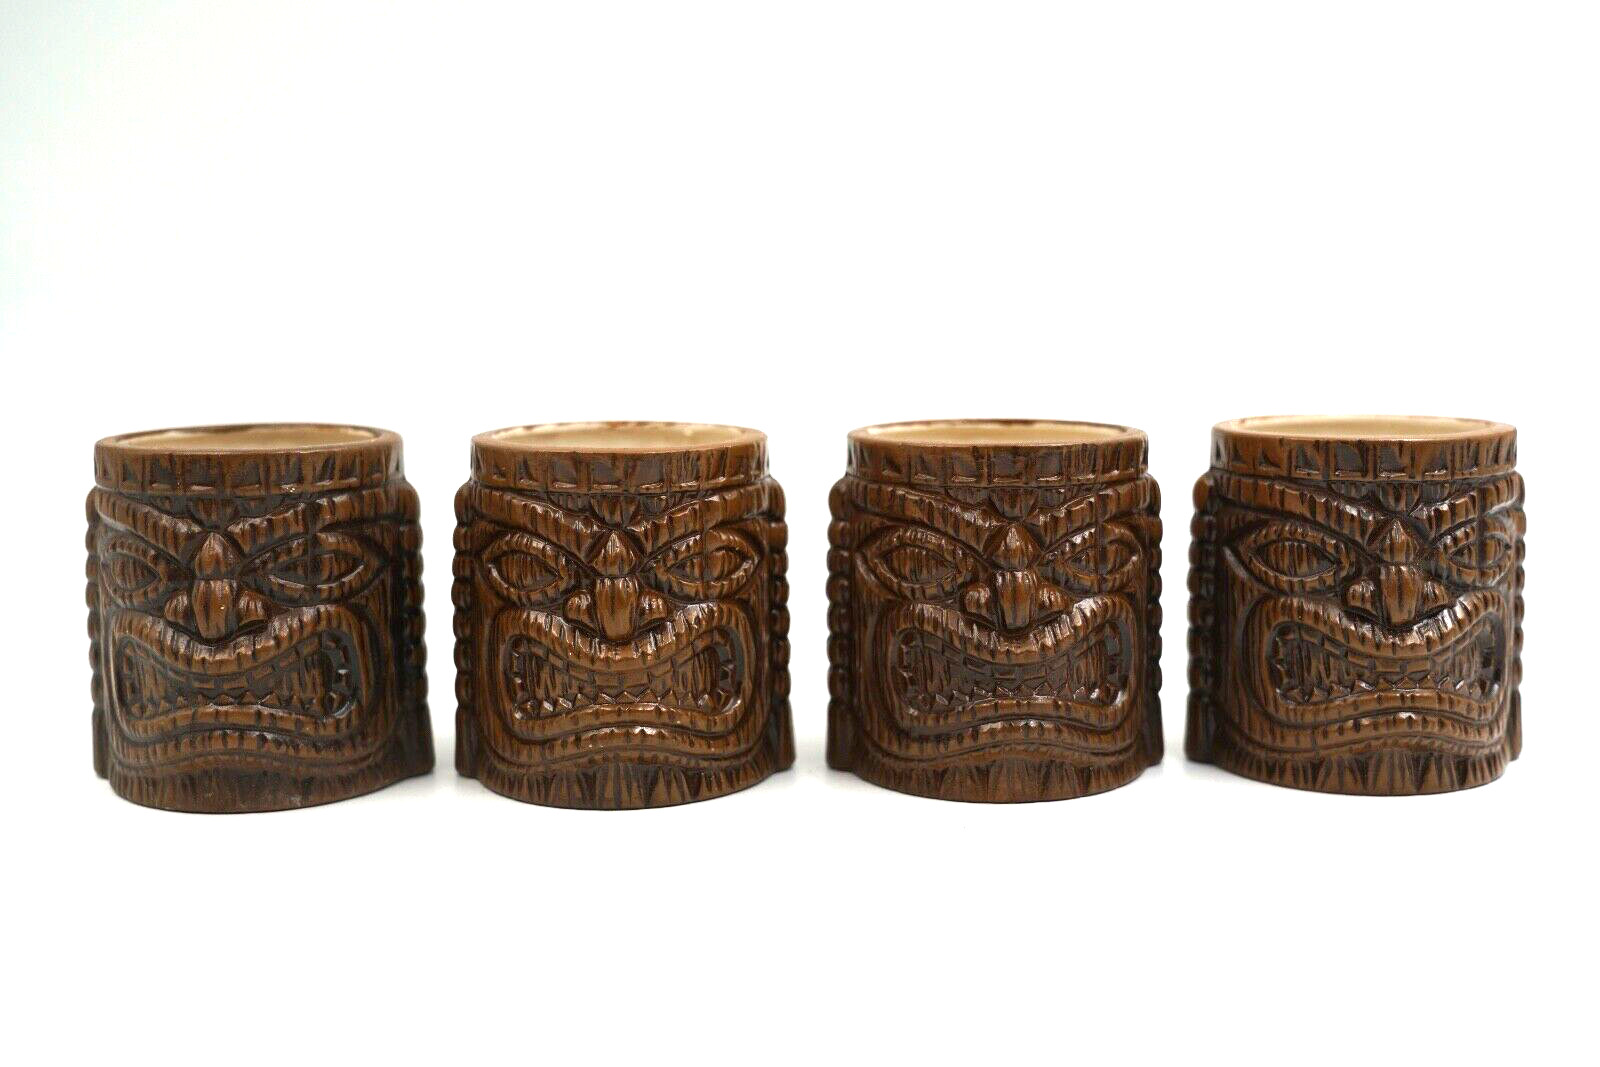 Set 4 Vintage Tiki Cup Mug Brown Ceramic Pottery Quon Quon Made In Japan 3” Tall